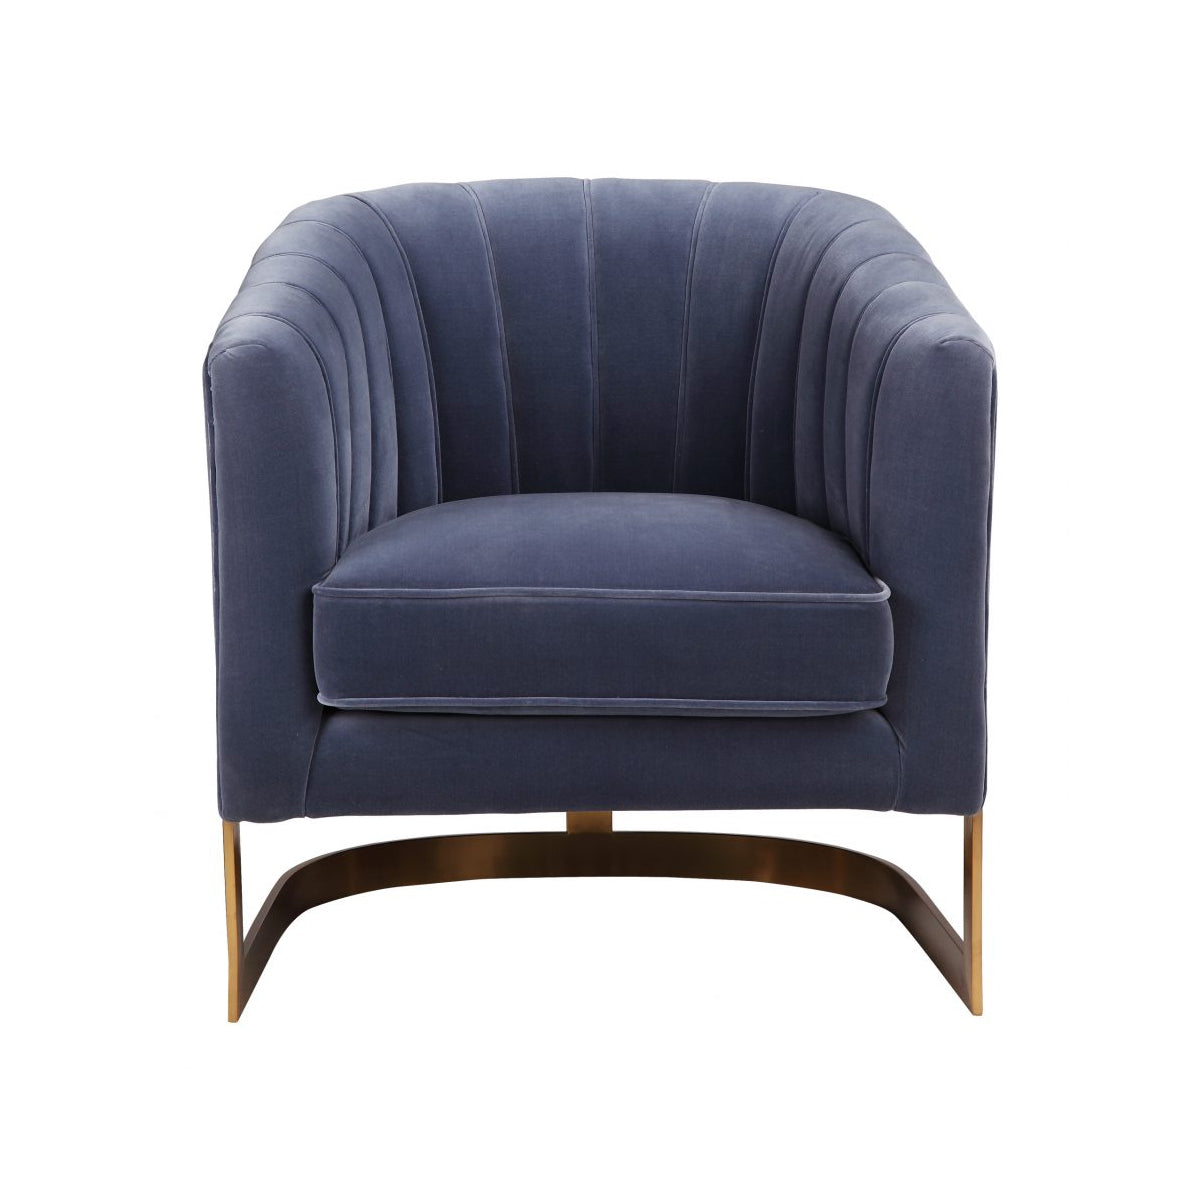 Load image into Gallery viewer, Carr Arm Chair BlueOccasional Chairs Moe&amp;#39;s  Blue   Four Hands, Burke Decor, Mid Century Modern Furniture, Old Bones Furniture Company, Old Bones Co, Modern Mid Century, Designer Furniture, https://www.oldbonesco.com/
